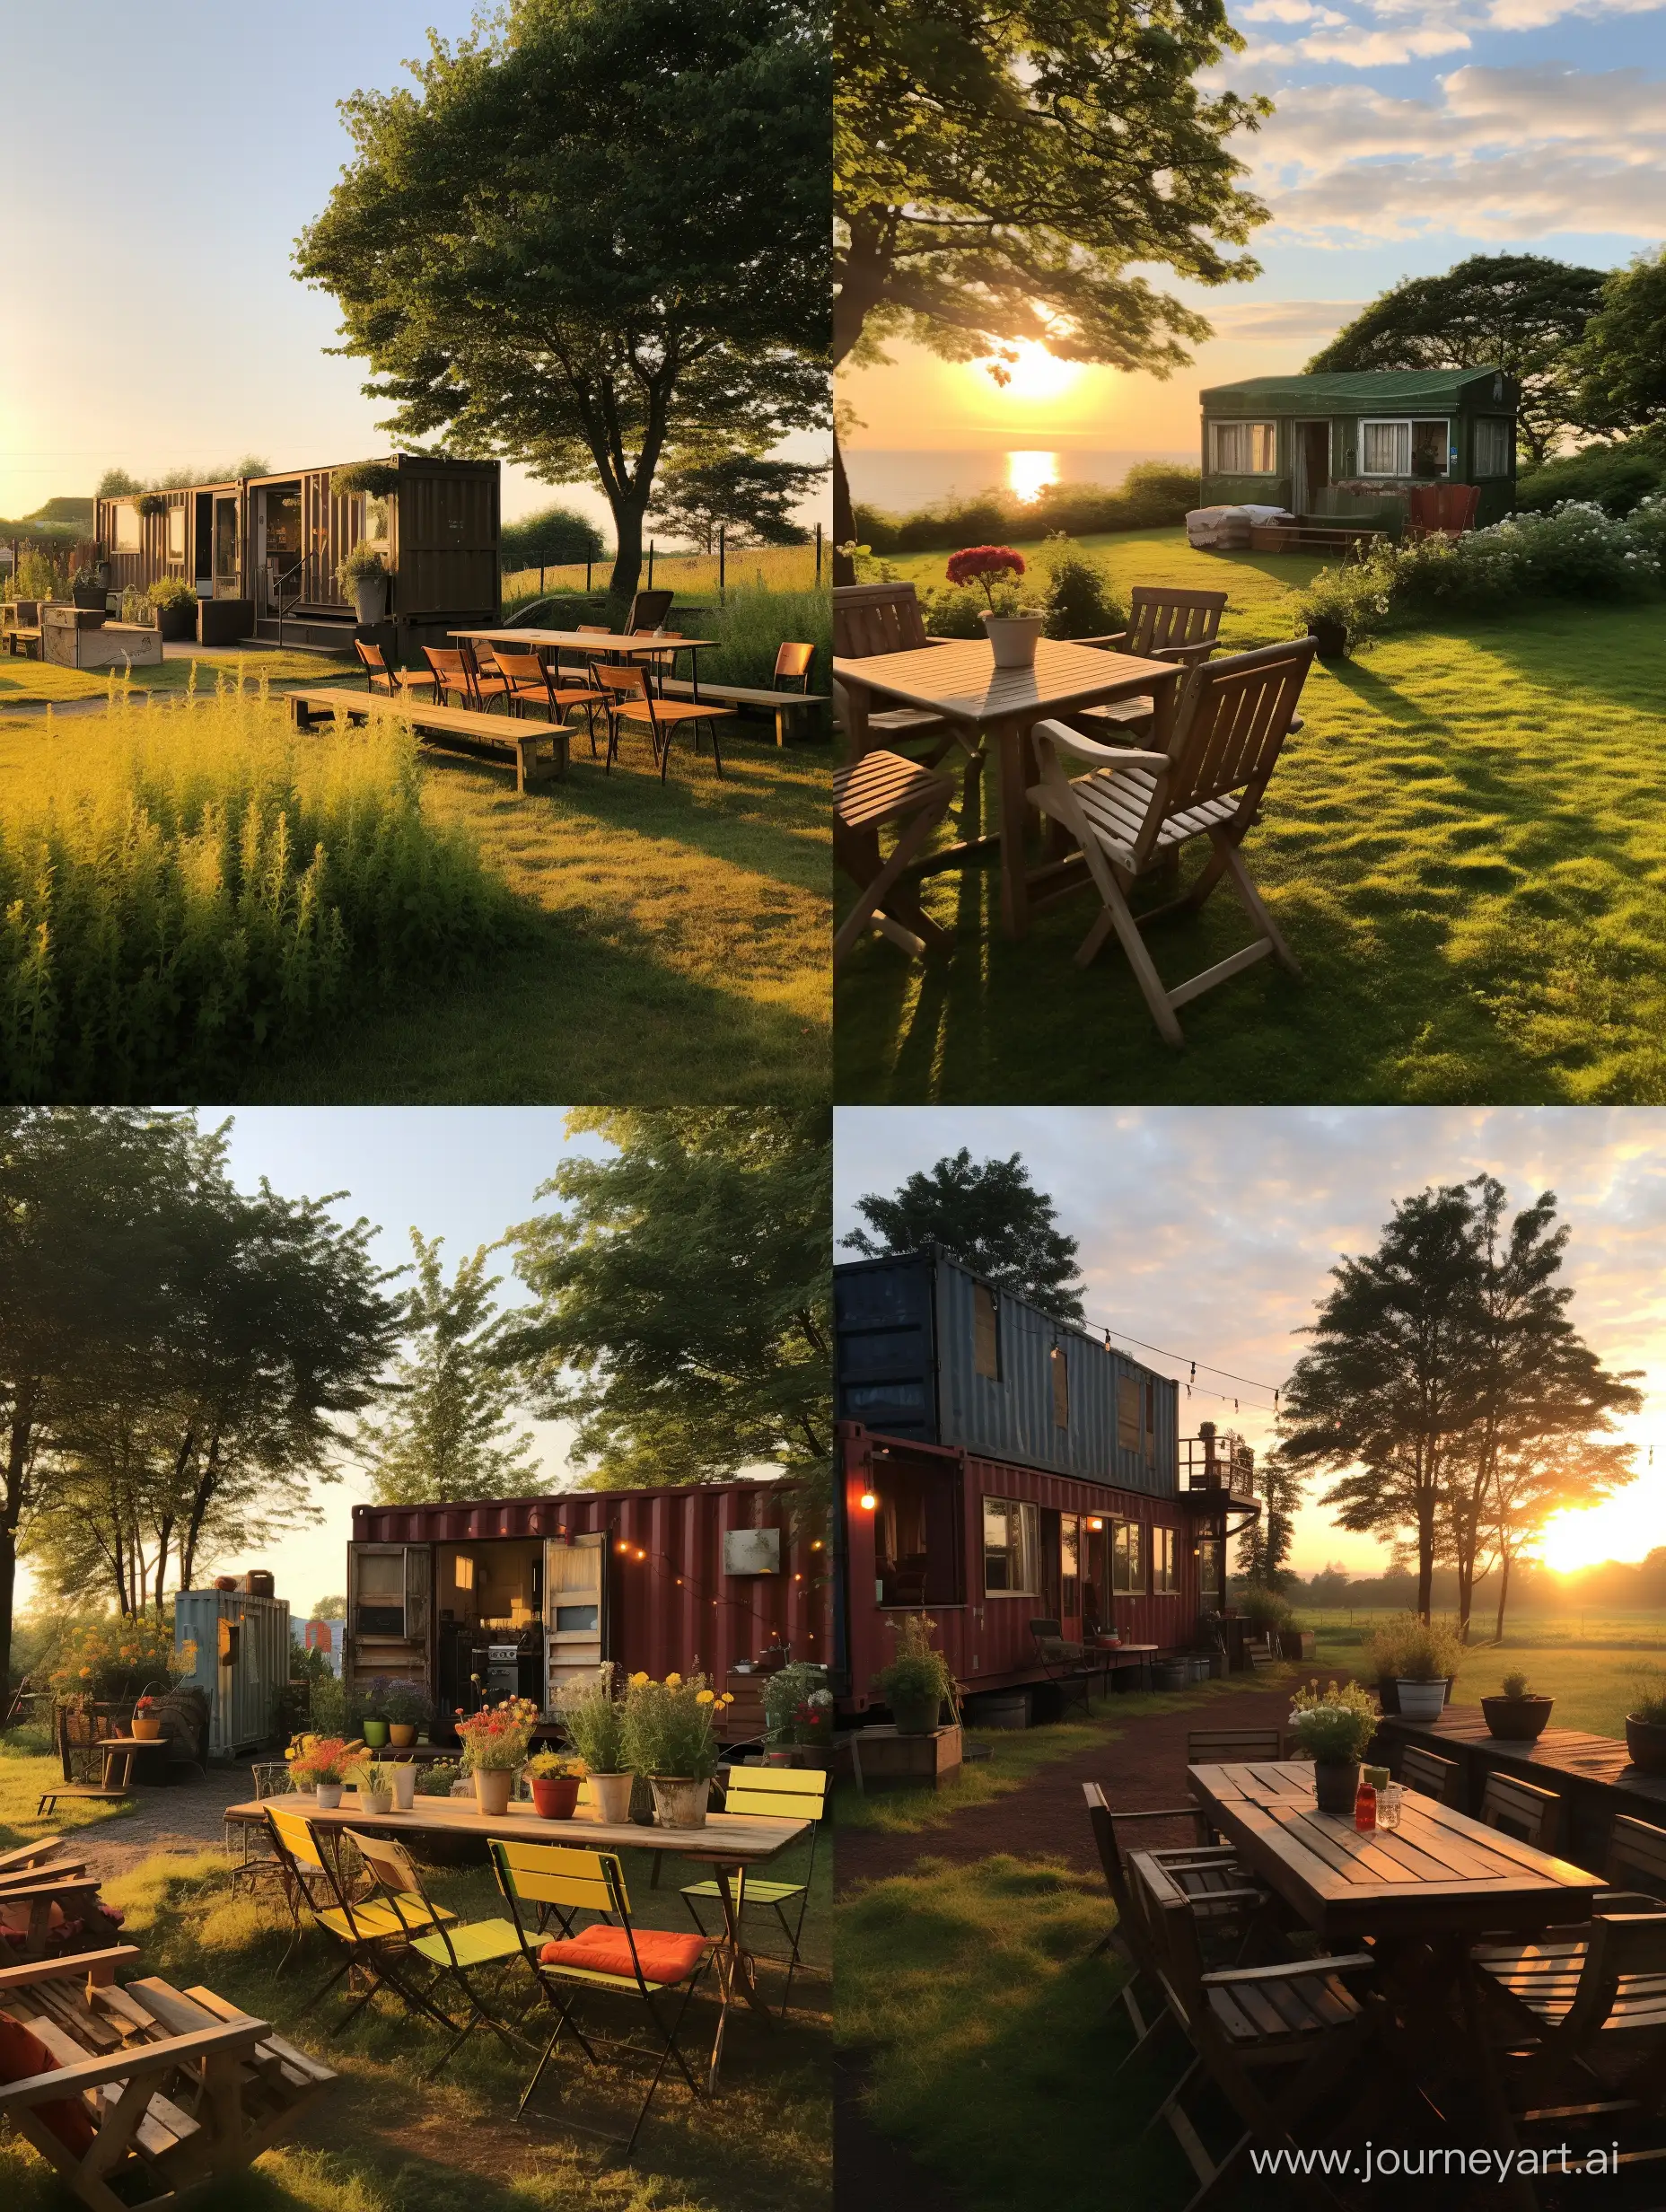 Charming-Container-Cabins-with-Rooftop-Terraces-and-Tea-Setting-in-Morning-Sunshine